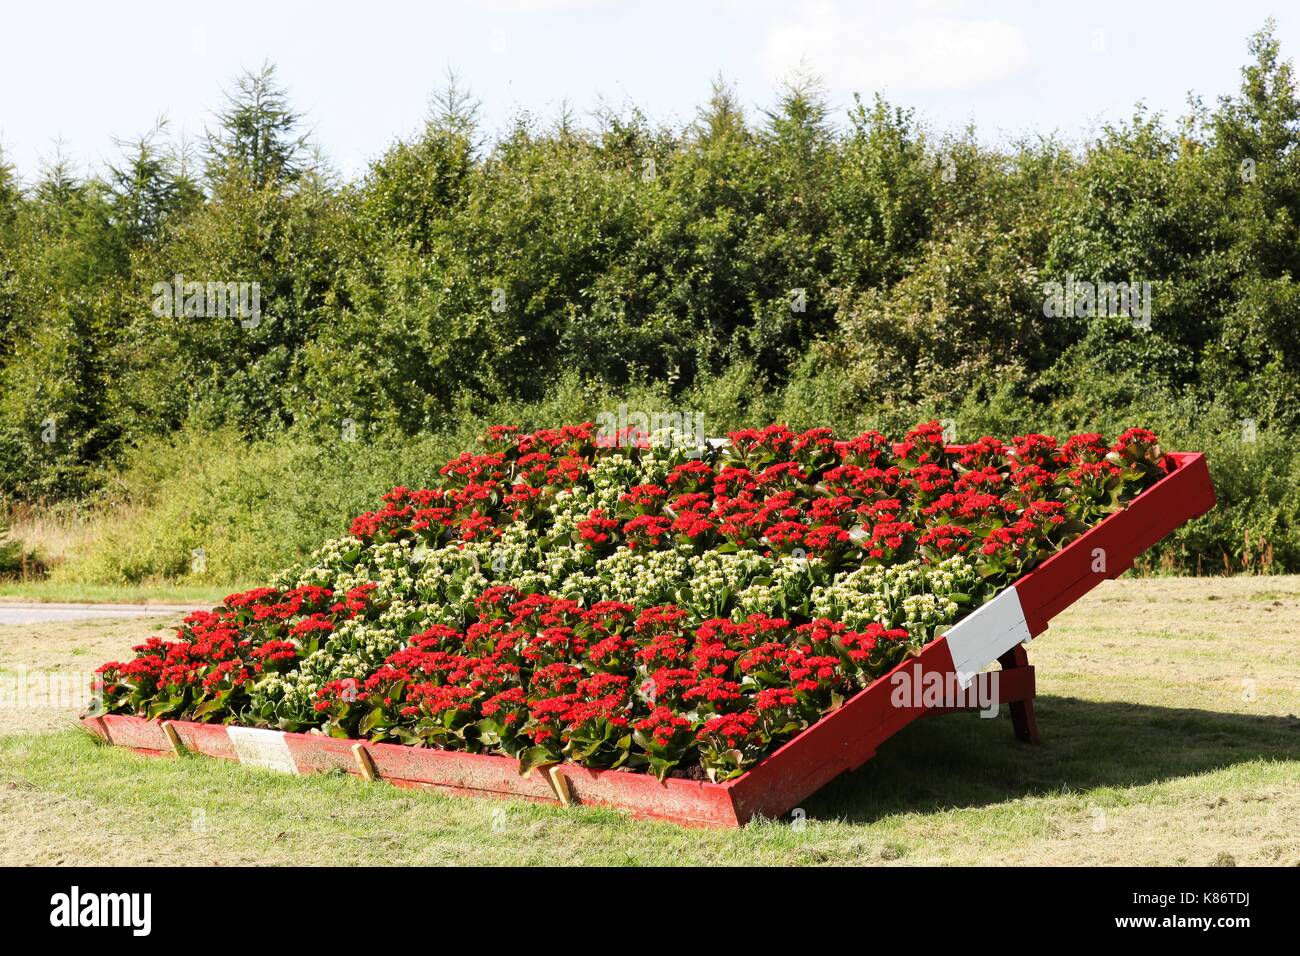 Danish flag with kalanchoe flowers at a traffic circle Stock Photo